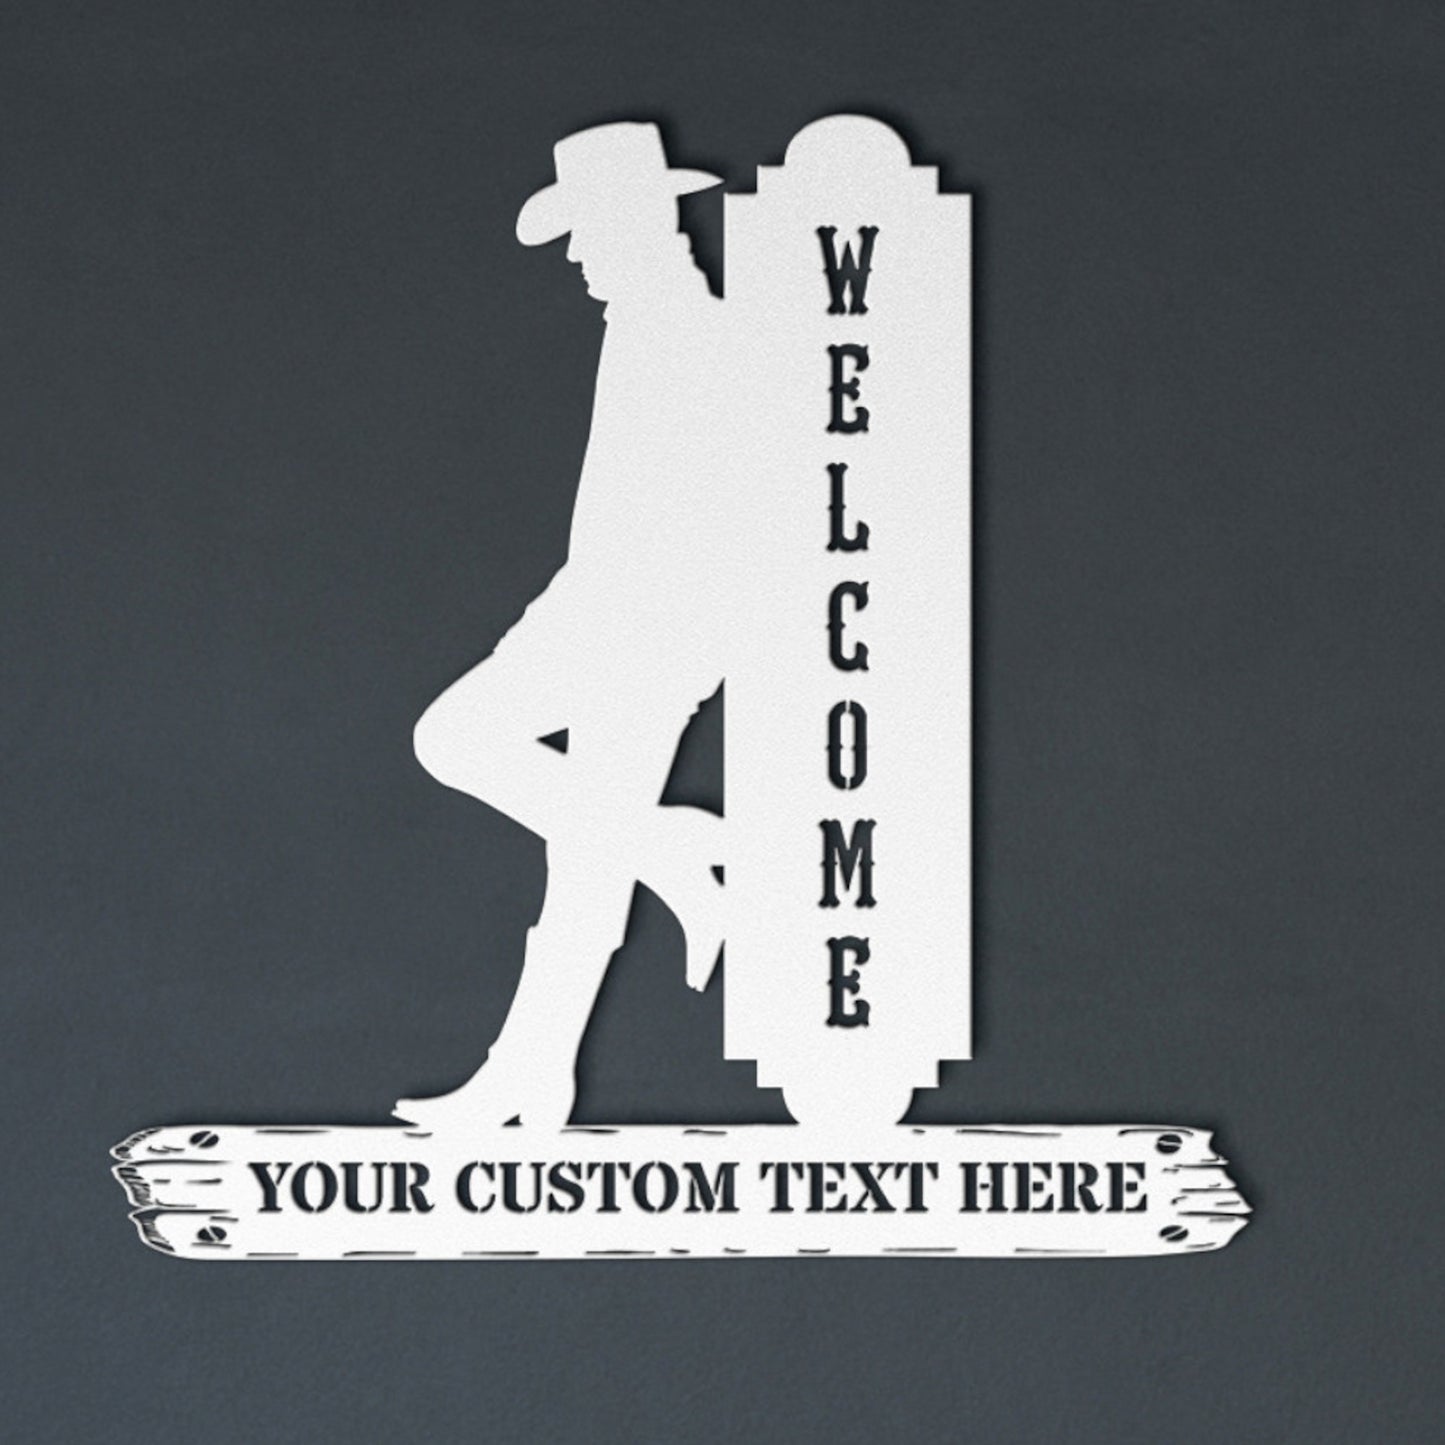 Personalized Cowboy Welcome Metal Sign Gift. Customizable Home Address Sign. Western Wall Decor. Door Hanging Name Sign. Housewarming Gift